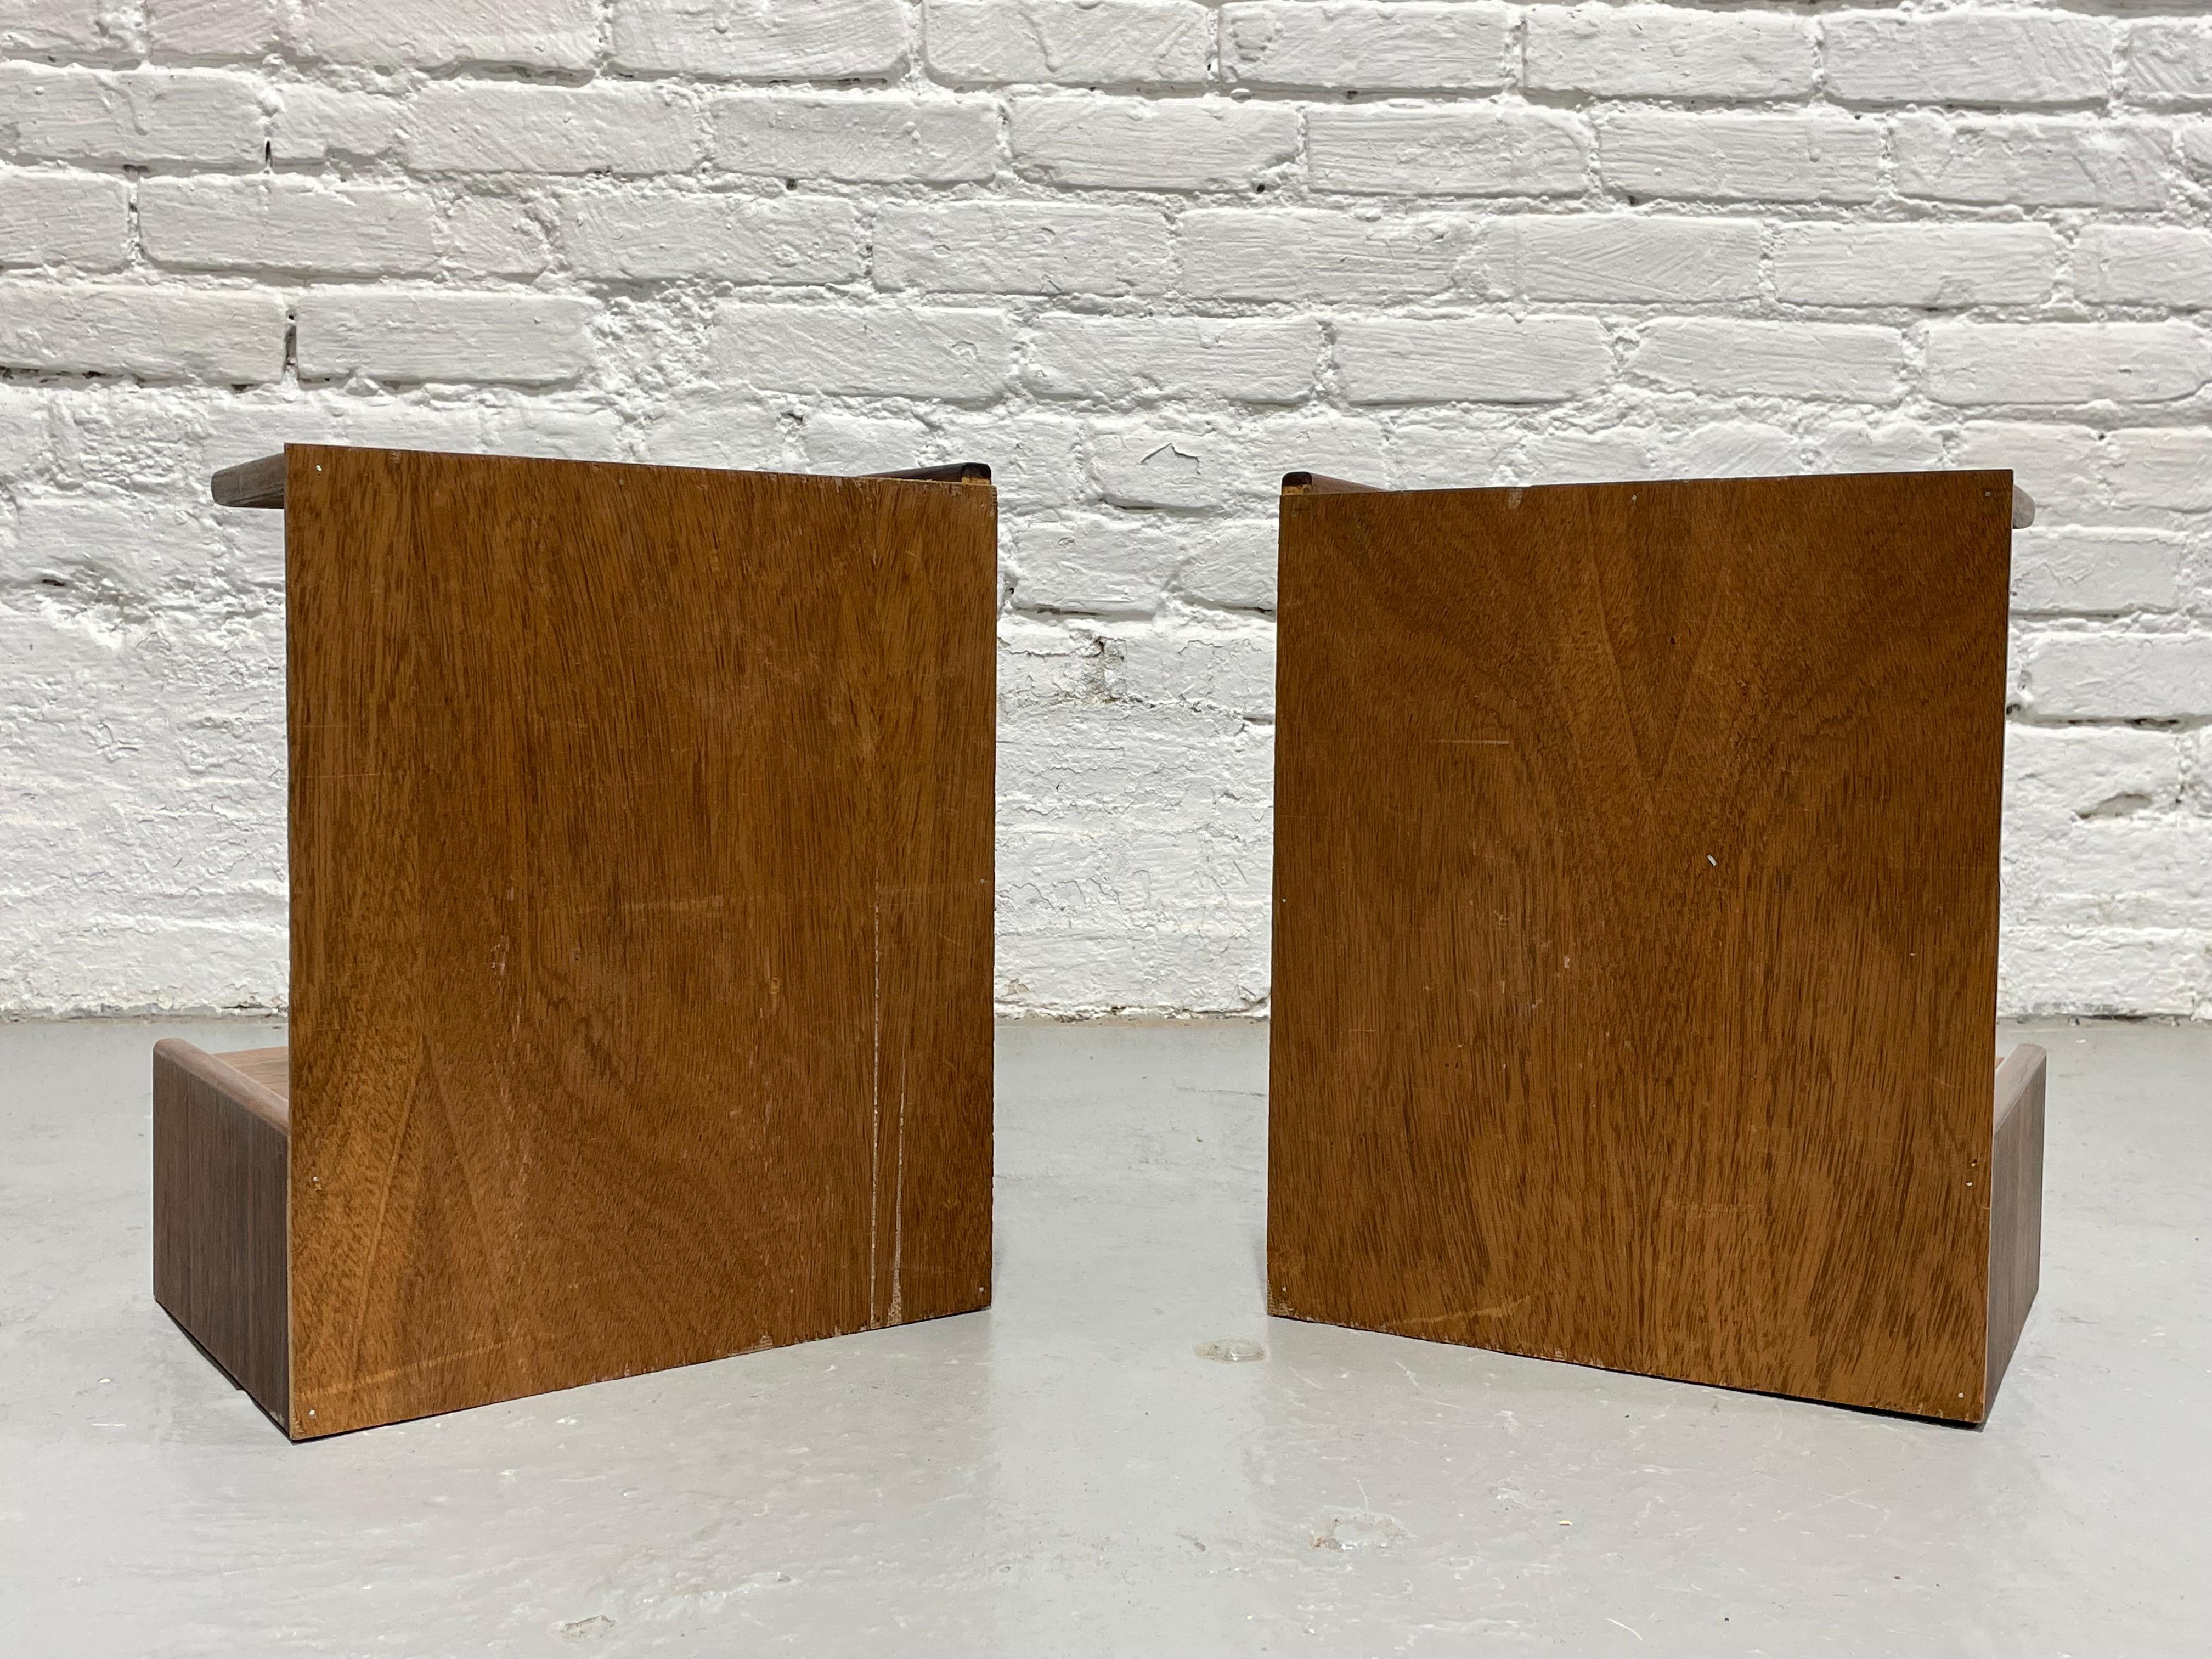 DANISH Mid Century Modern ROSEWOOD Hanging NIGHTSTANDS / Bedside Tables, c. 1950 For Sale 9